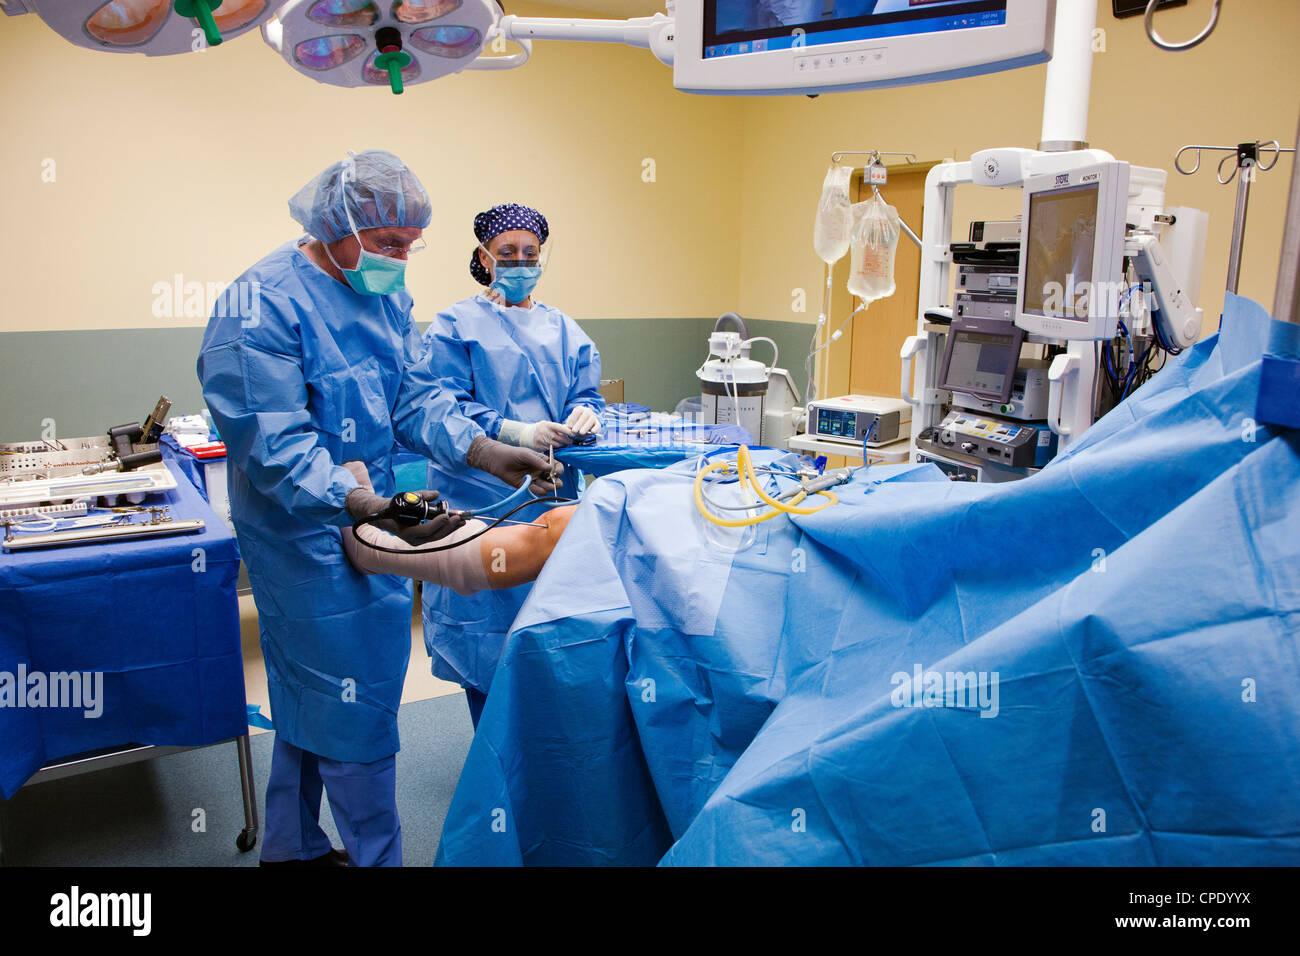 Orthopedic surgeon preparing patient for arthroscopic knee surgery in a hospital operating room suite Stock Photo